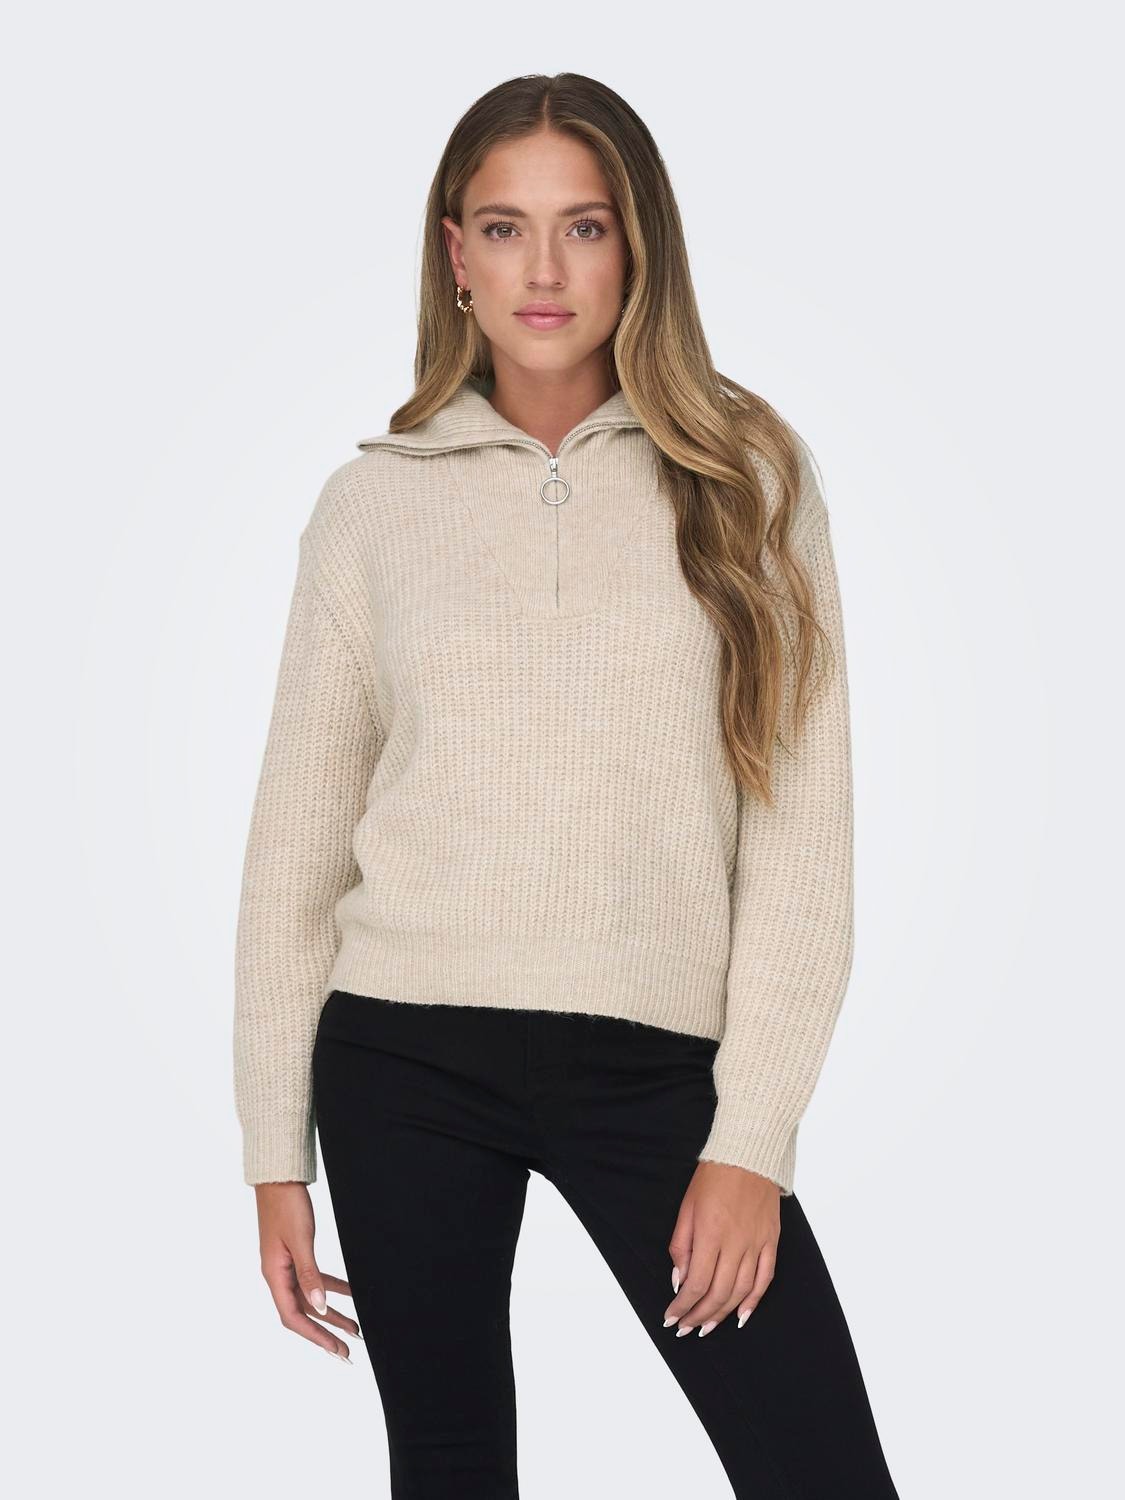 ONLY Regular Fit High neck Ribbed cuffs Pullover -Cloud Dancer - 15247008